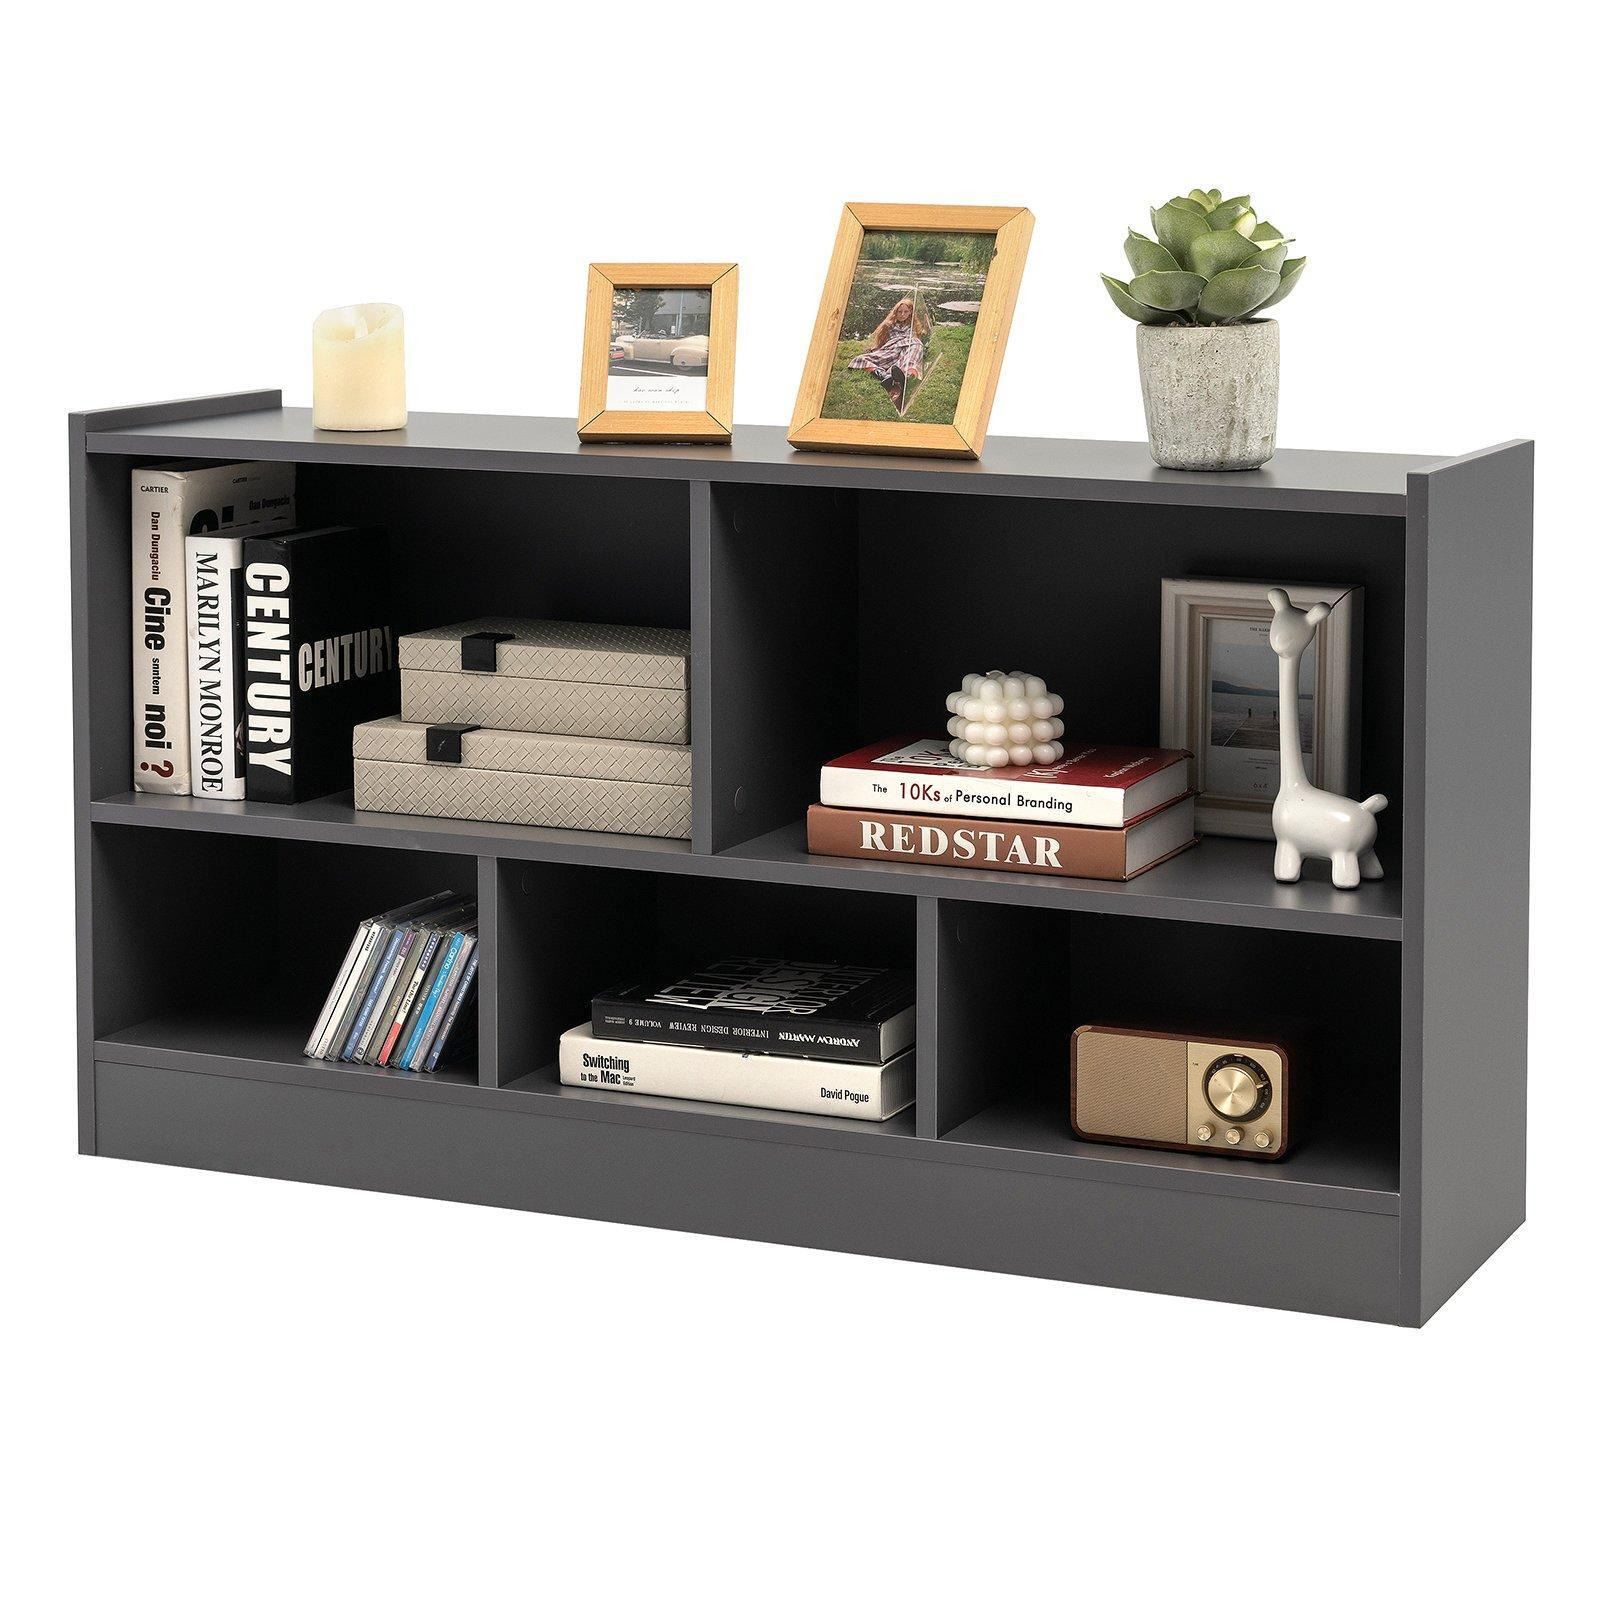 Wooden Cube Bookcase 2 Tier Open Storage Shelving Unit with 5 Compartments - image 1